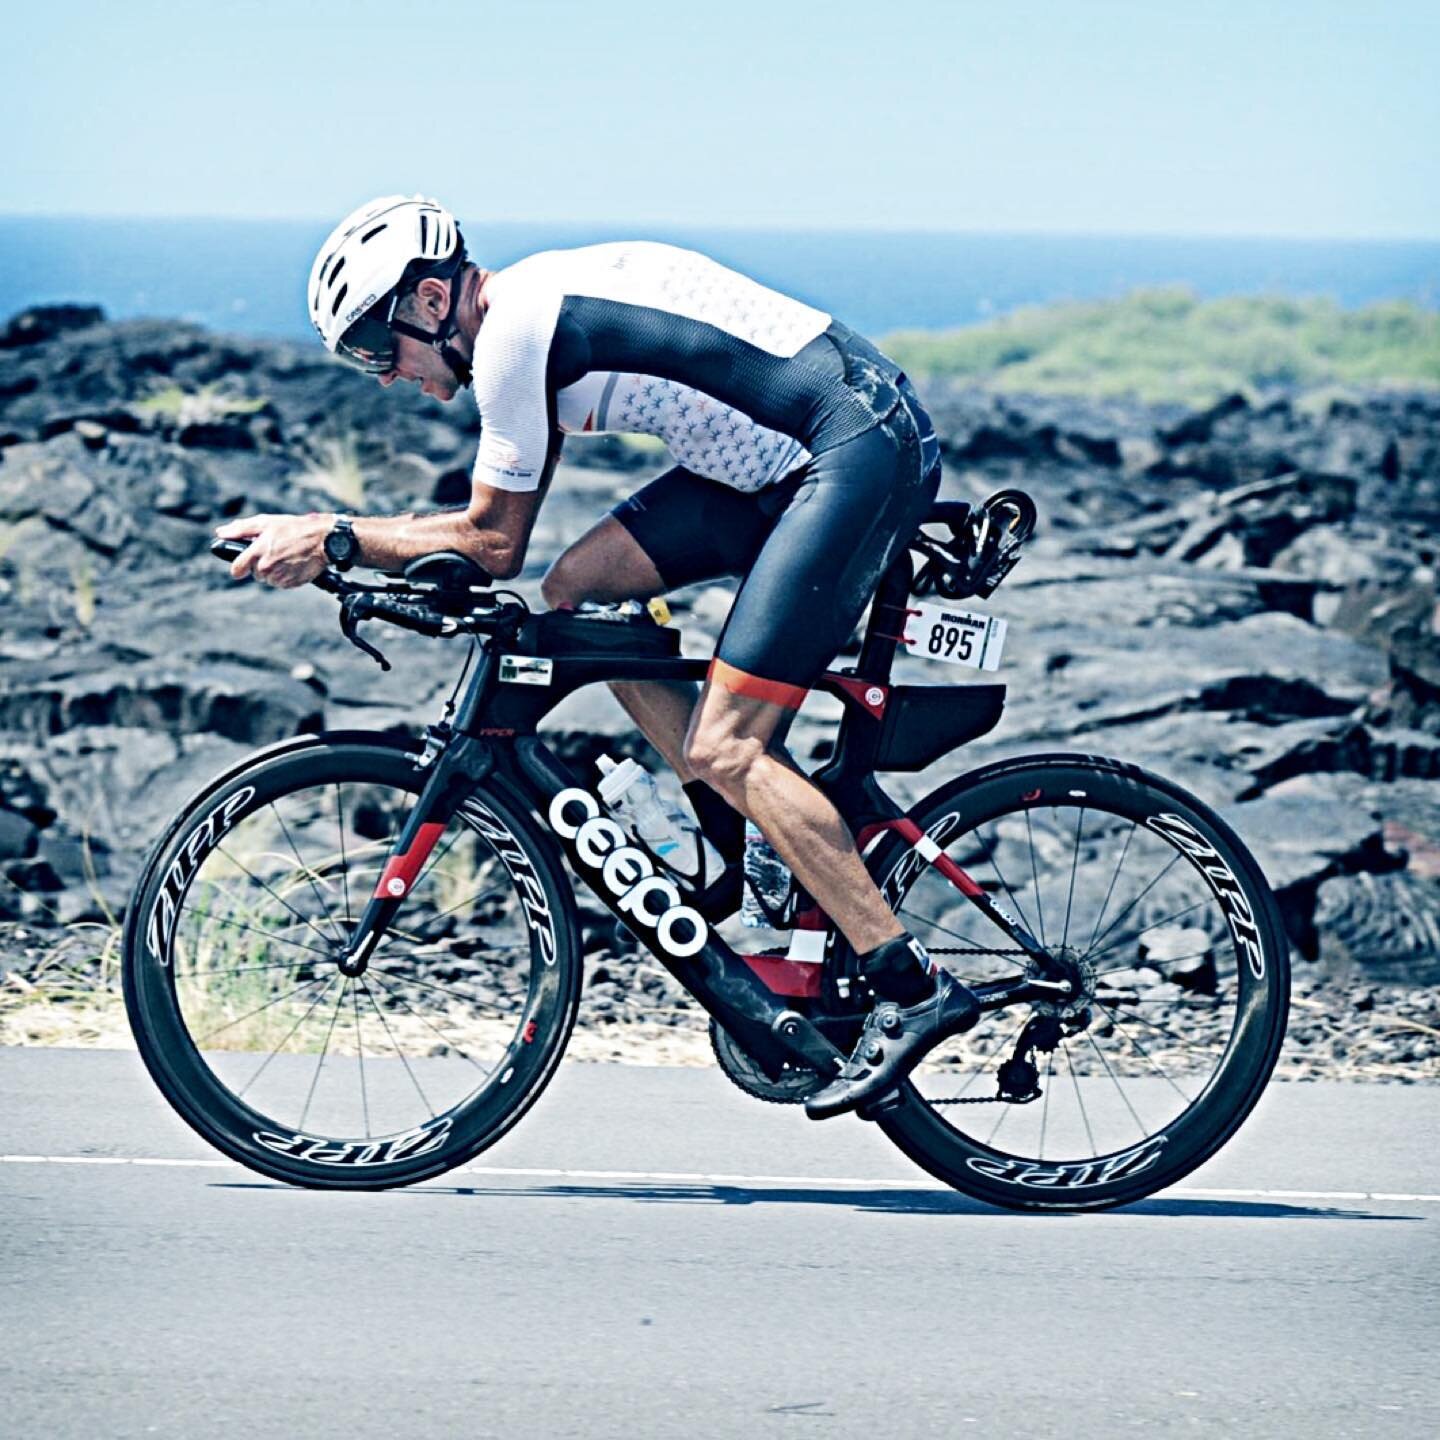 Why I train (#3): to have the privilege to race hard in idyllic places (e.g. Kona, Hawaii). And you, why do you train? #beyondthelinecoaching